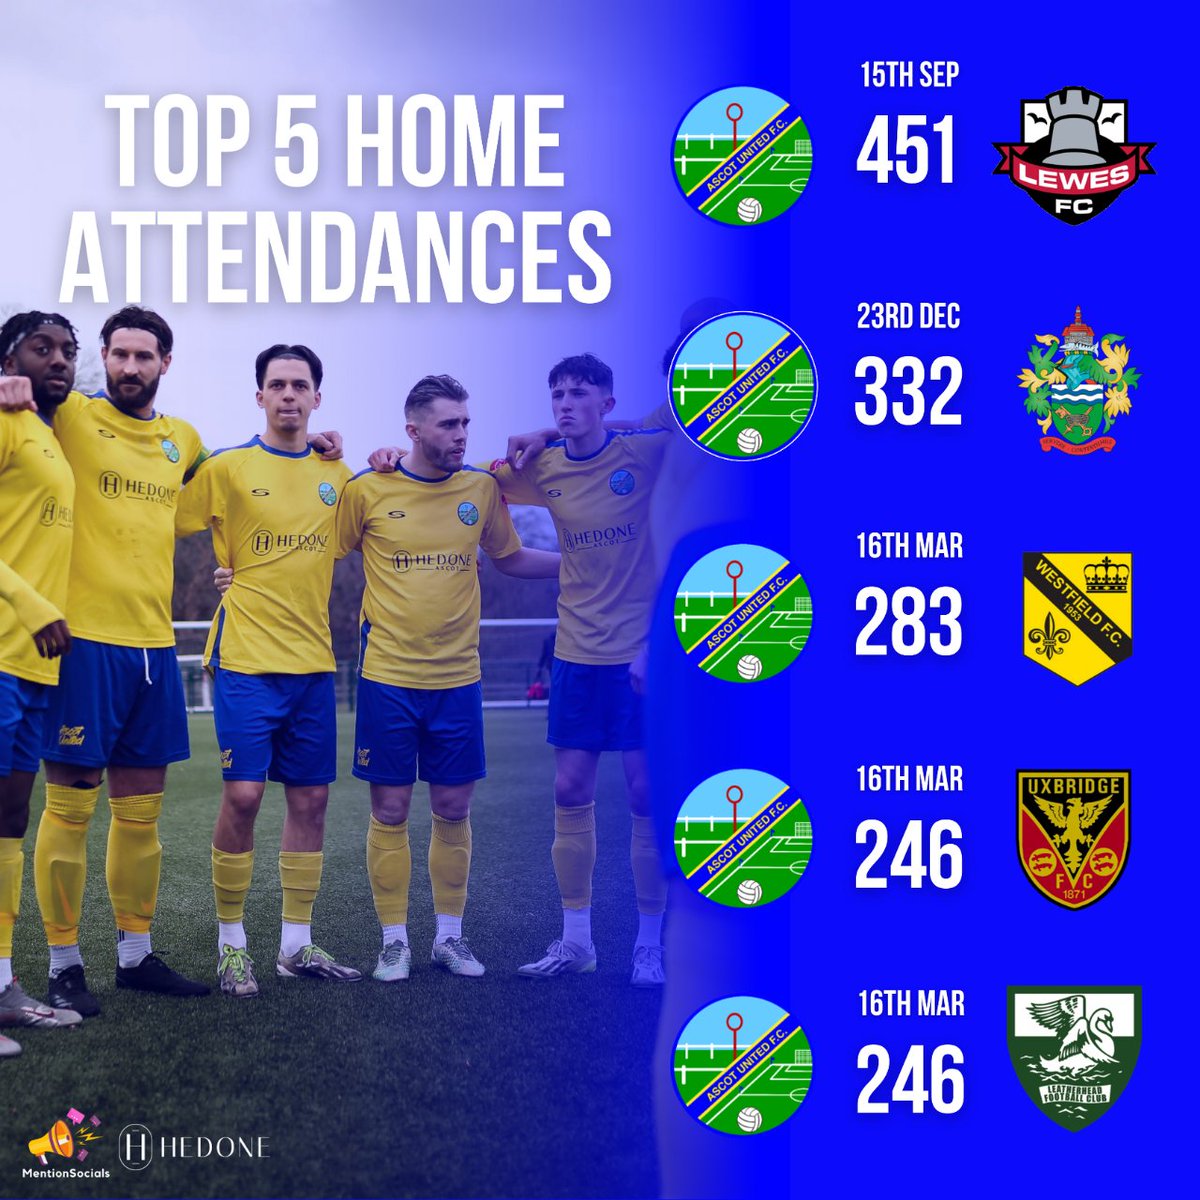 Time to look back on the #Yellas first season at Step 4!

Our top 5 Home Attendances in the 2023/24 season 👏🏻

A massive thank you to all you Yellas that came down and supported the boys this year.

#WeAreAscot #UpTheYellas 💛💙